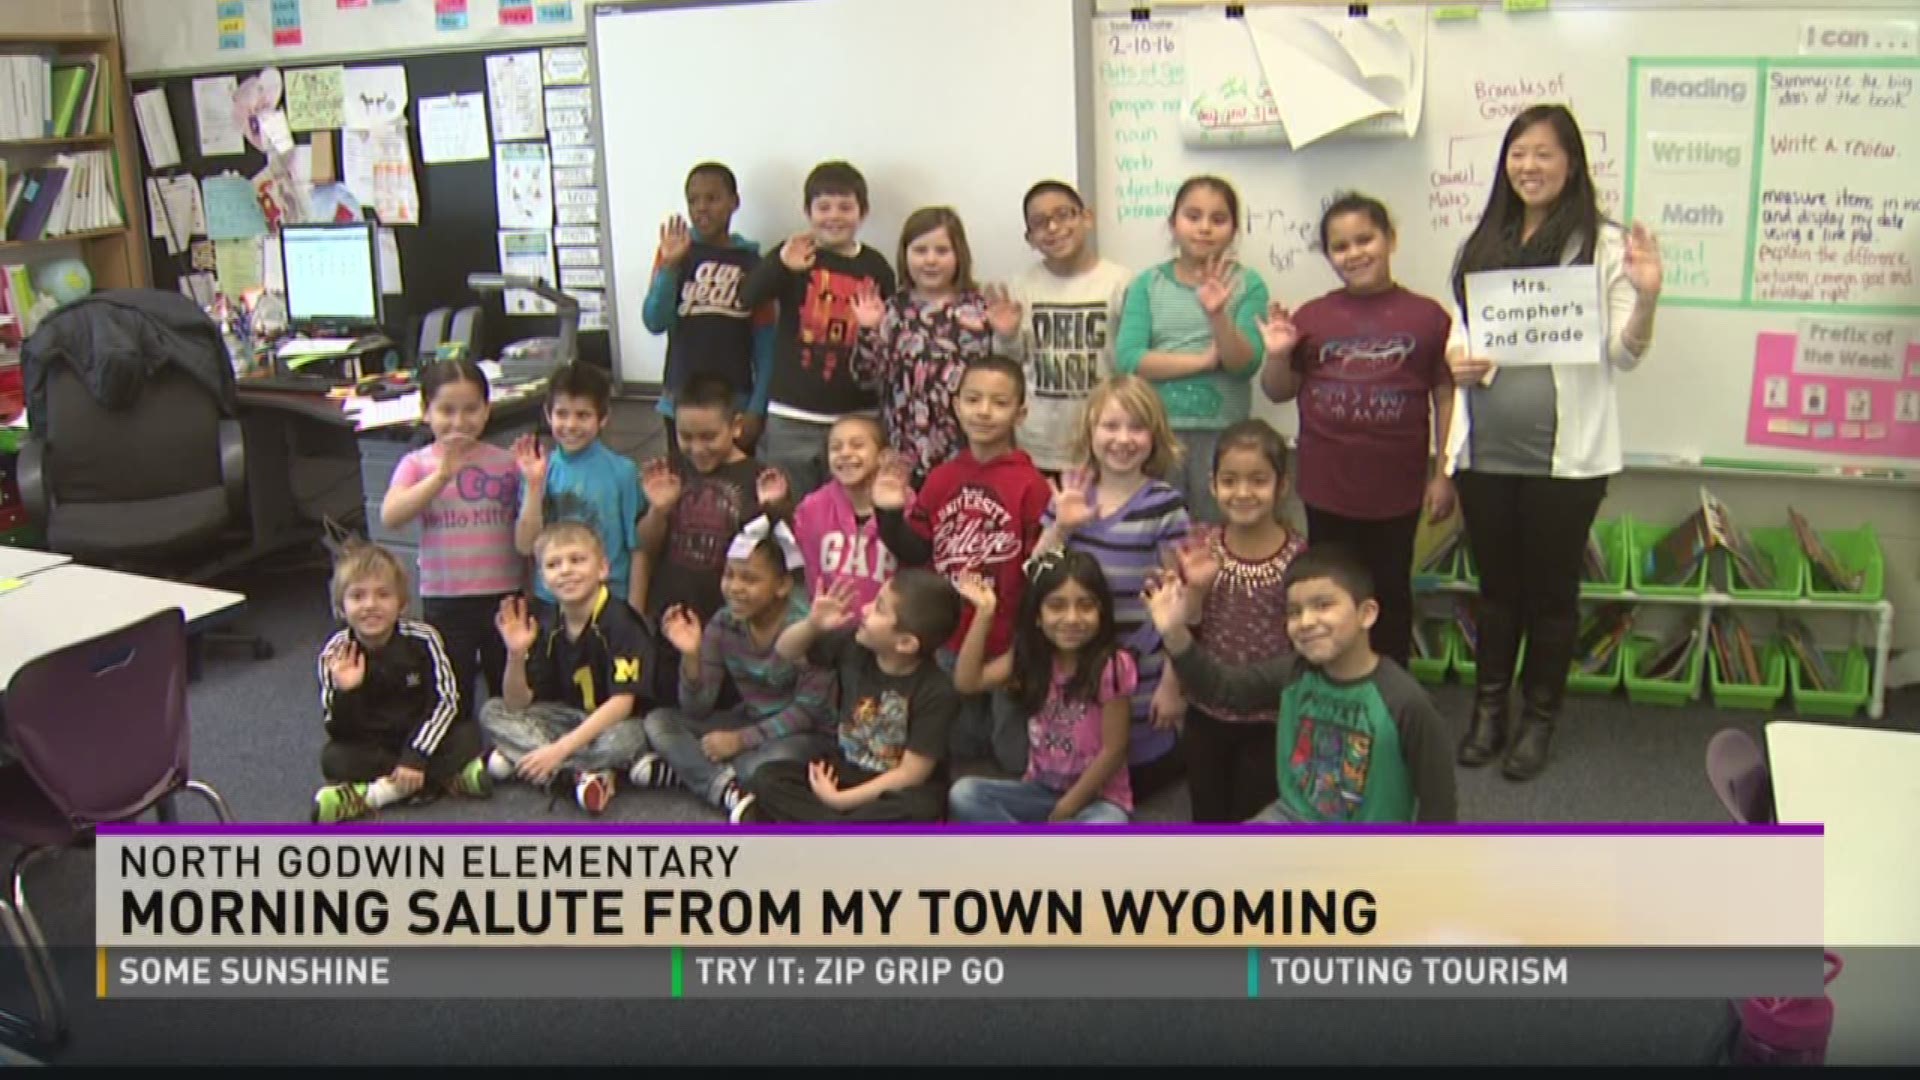 This is Mrs. Compher's second grade class from North Godwin Elementary.